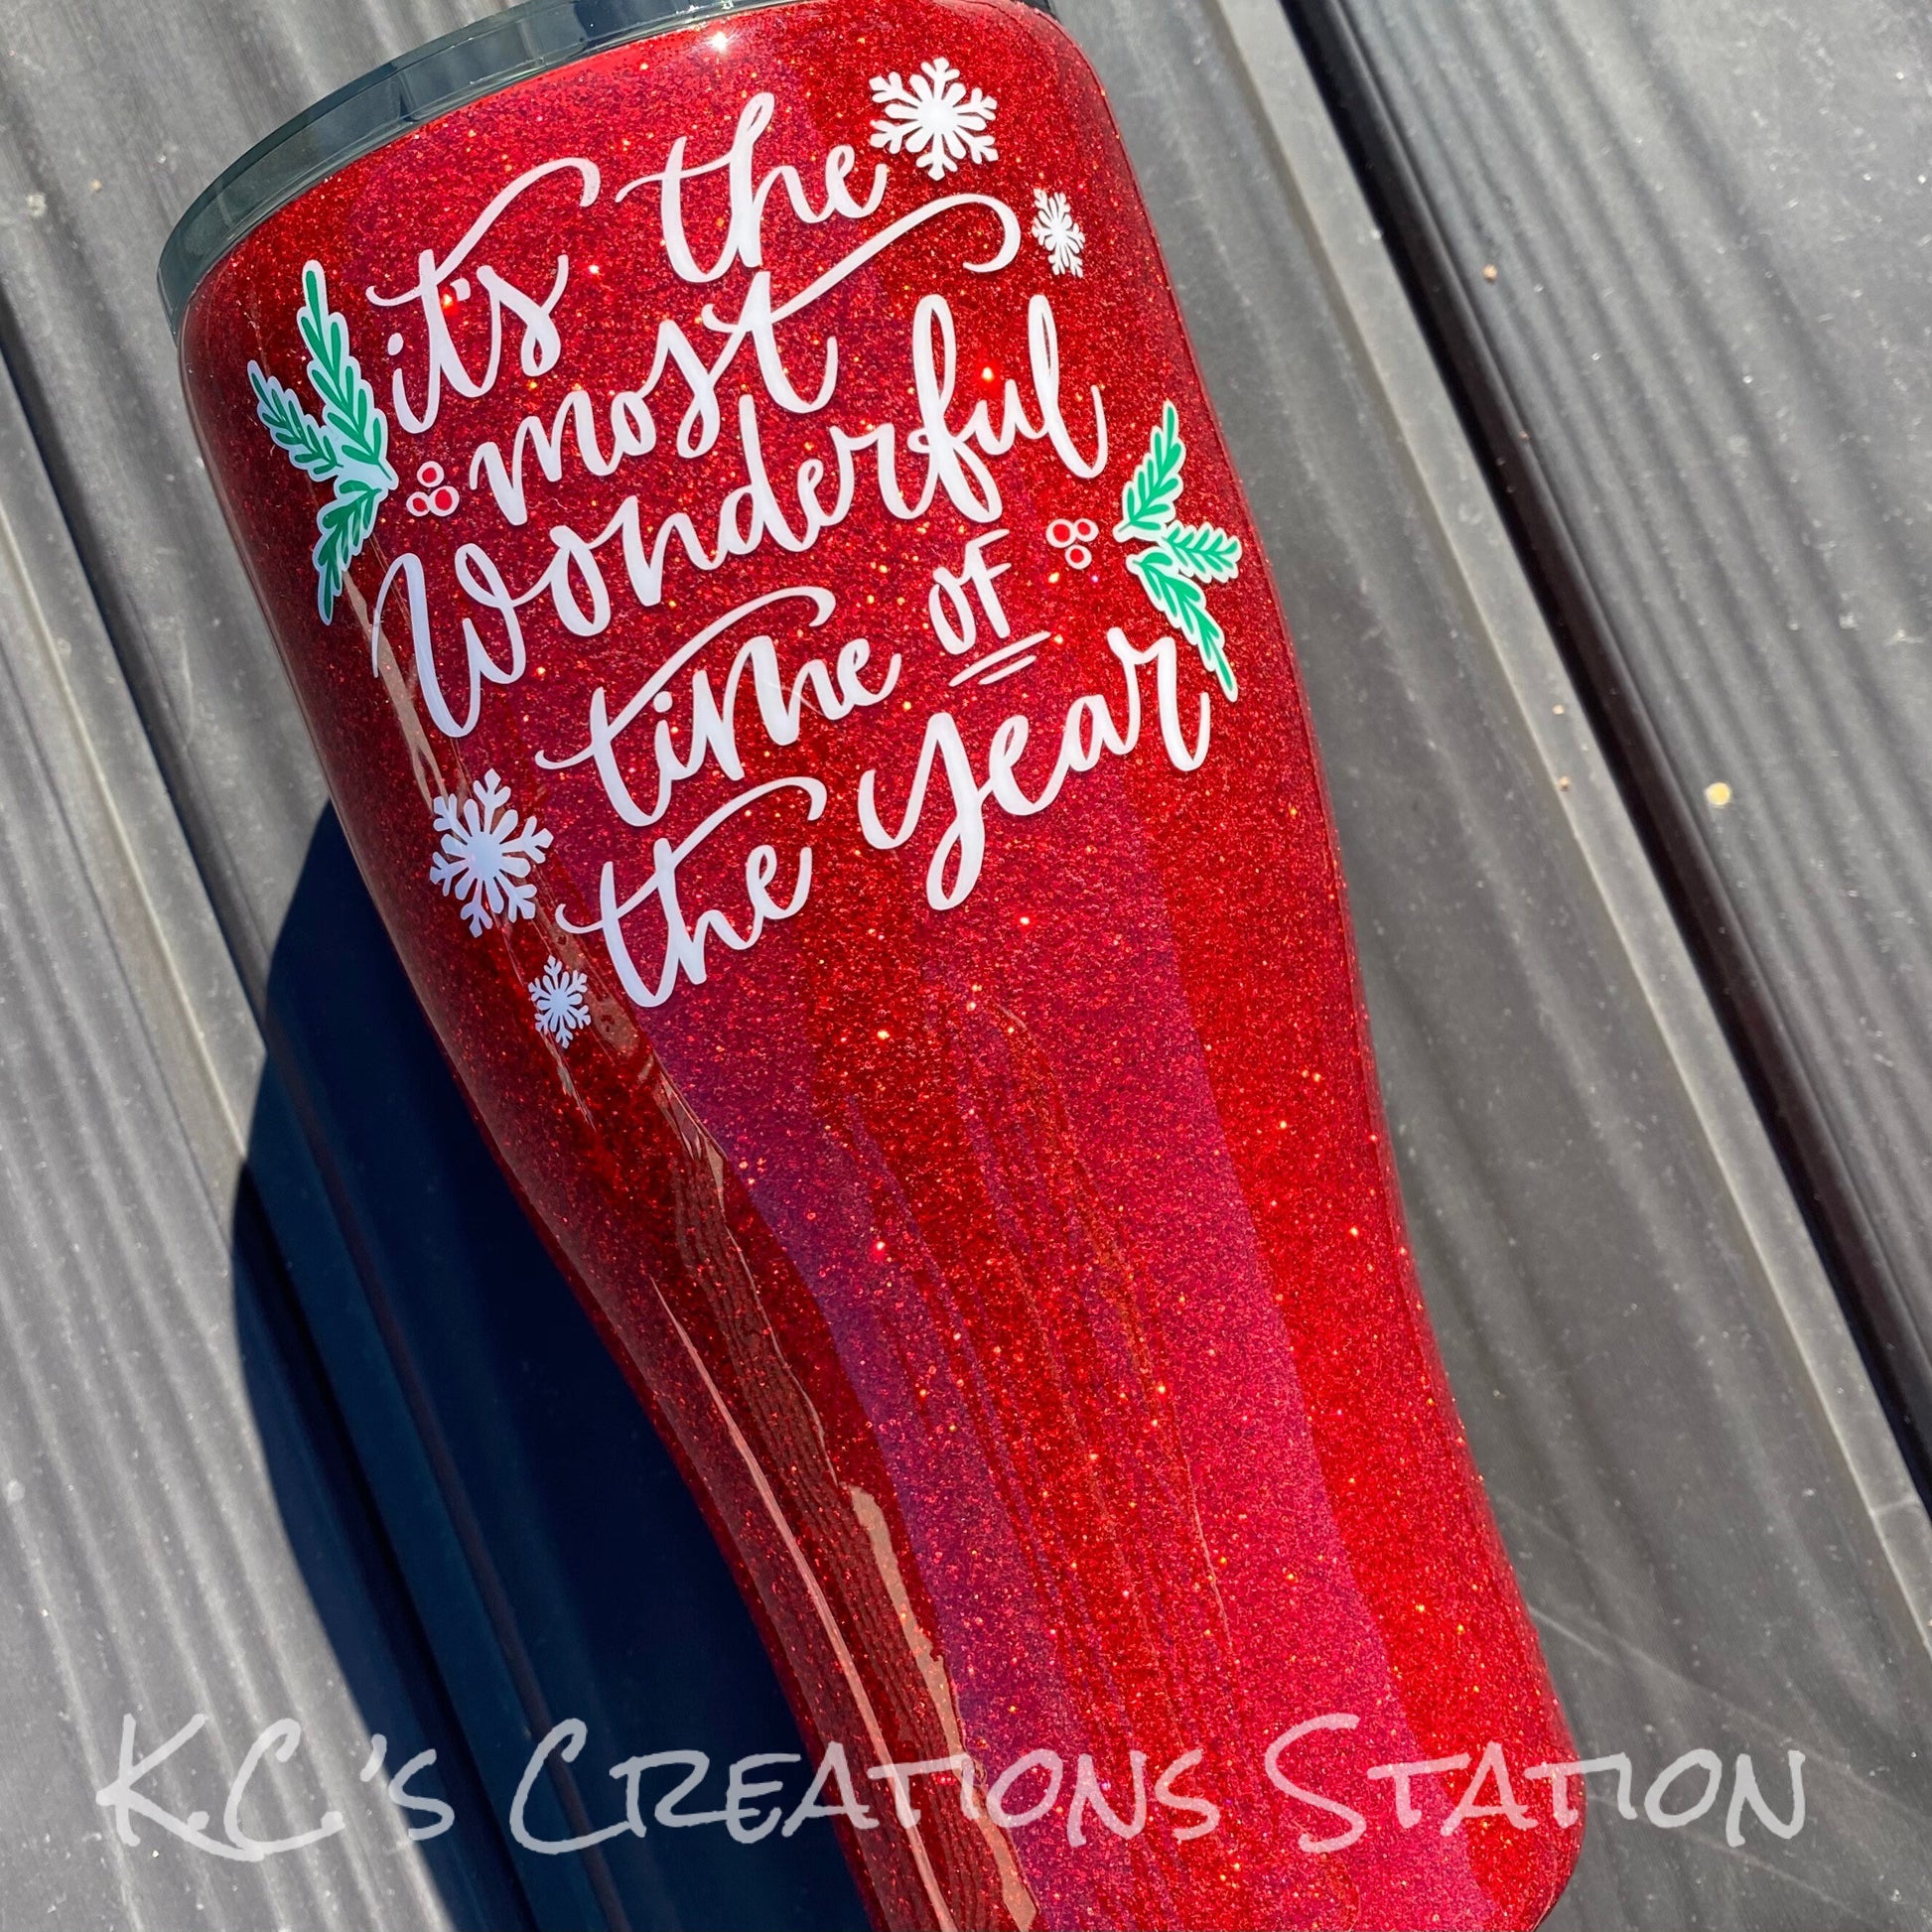 Custom Christmas Tumbler - It's the Most Wonderful Time - Great Gift! –  Sunny Box